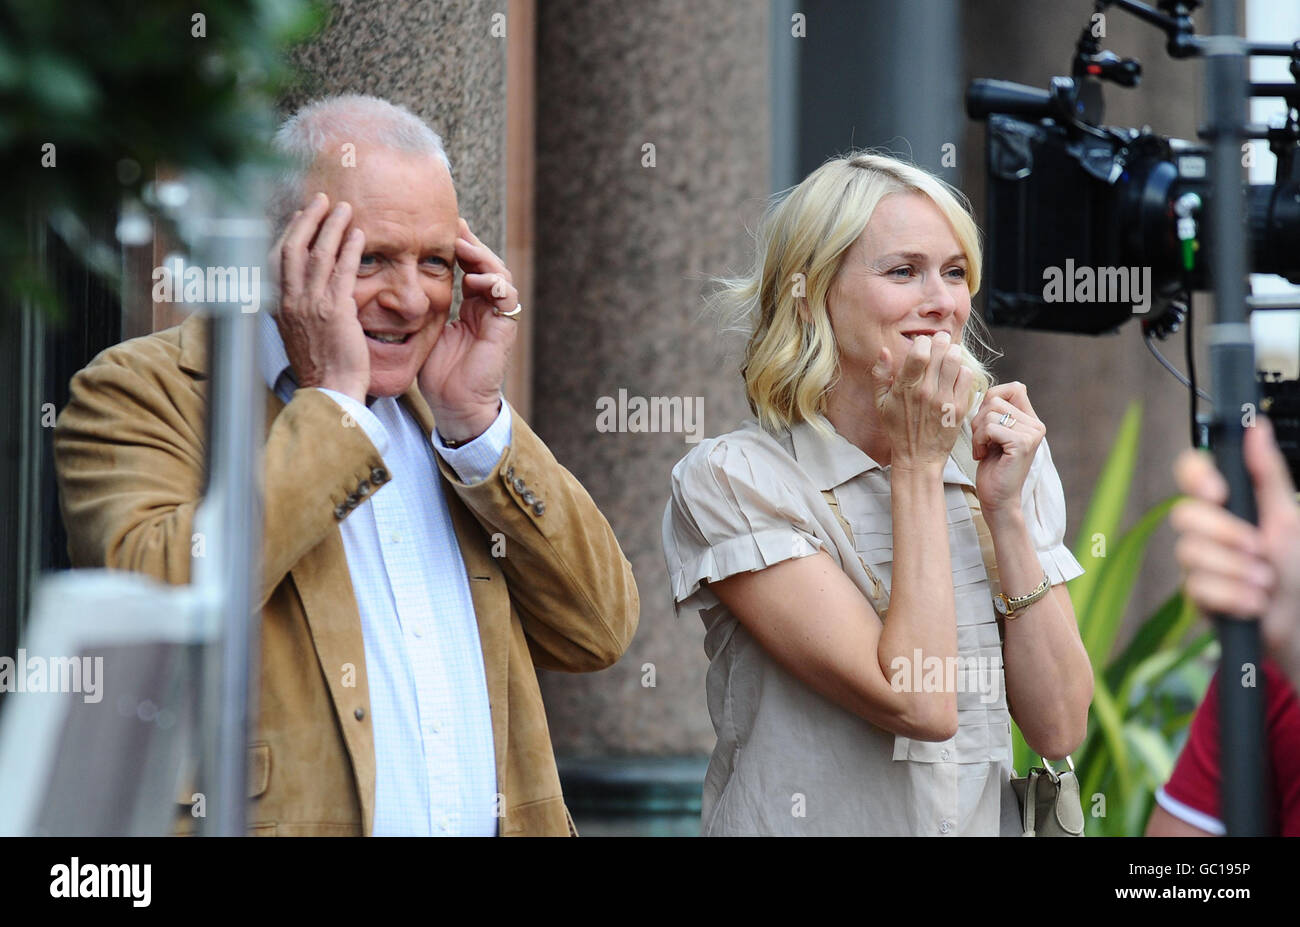 Sir Anthony Hopkins (left) and Lucy Punch on the set of Woody Allen's new film currently titled 'Wasp 09', in London. Stock Photo